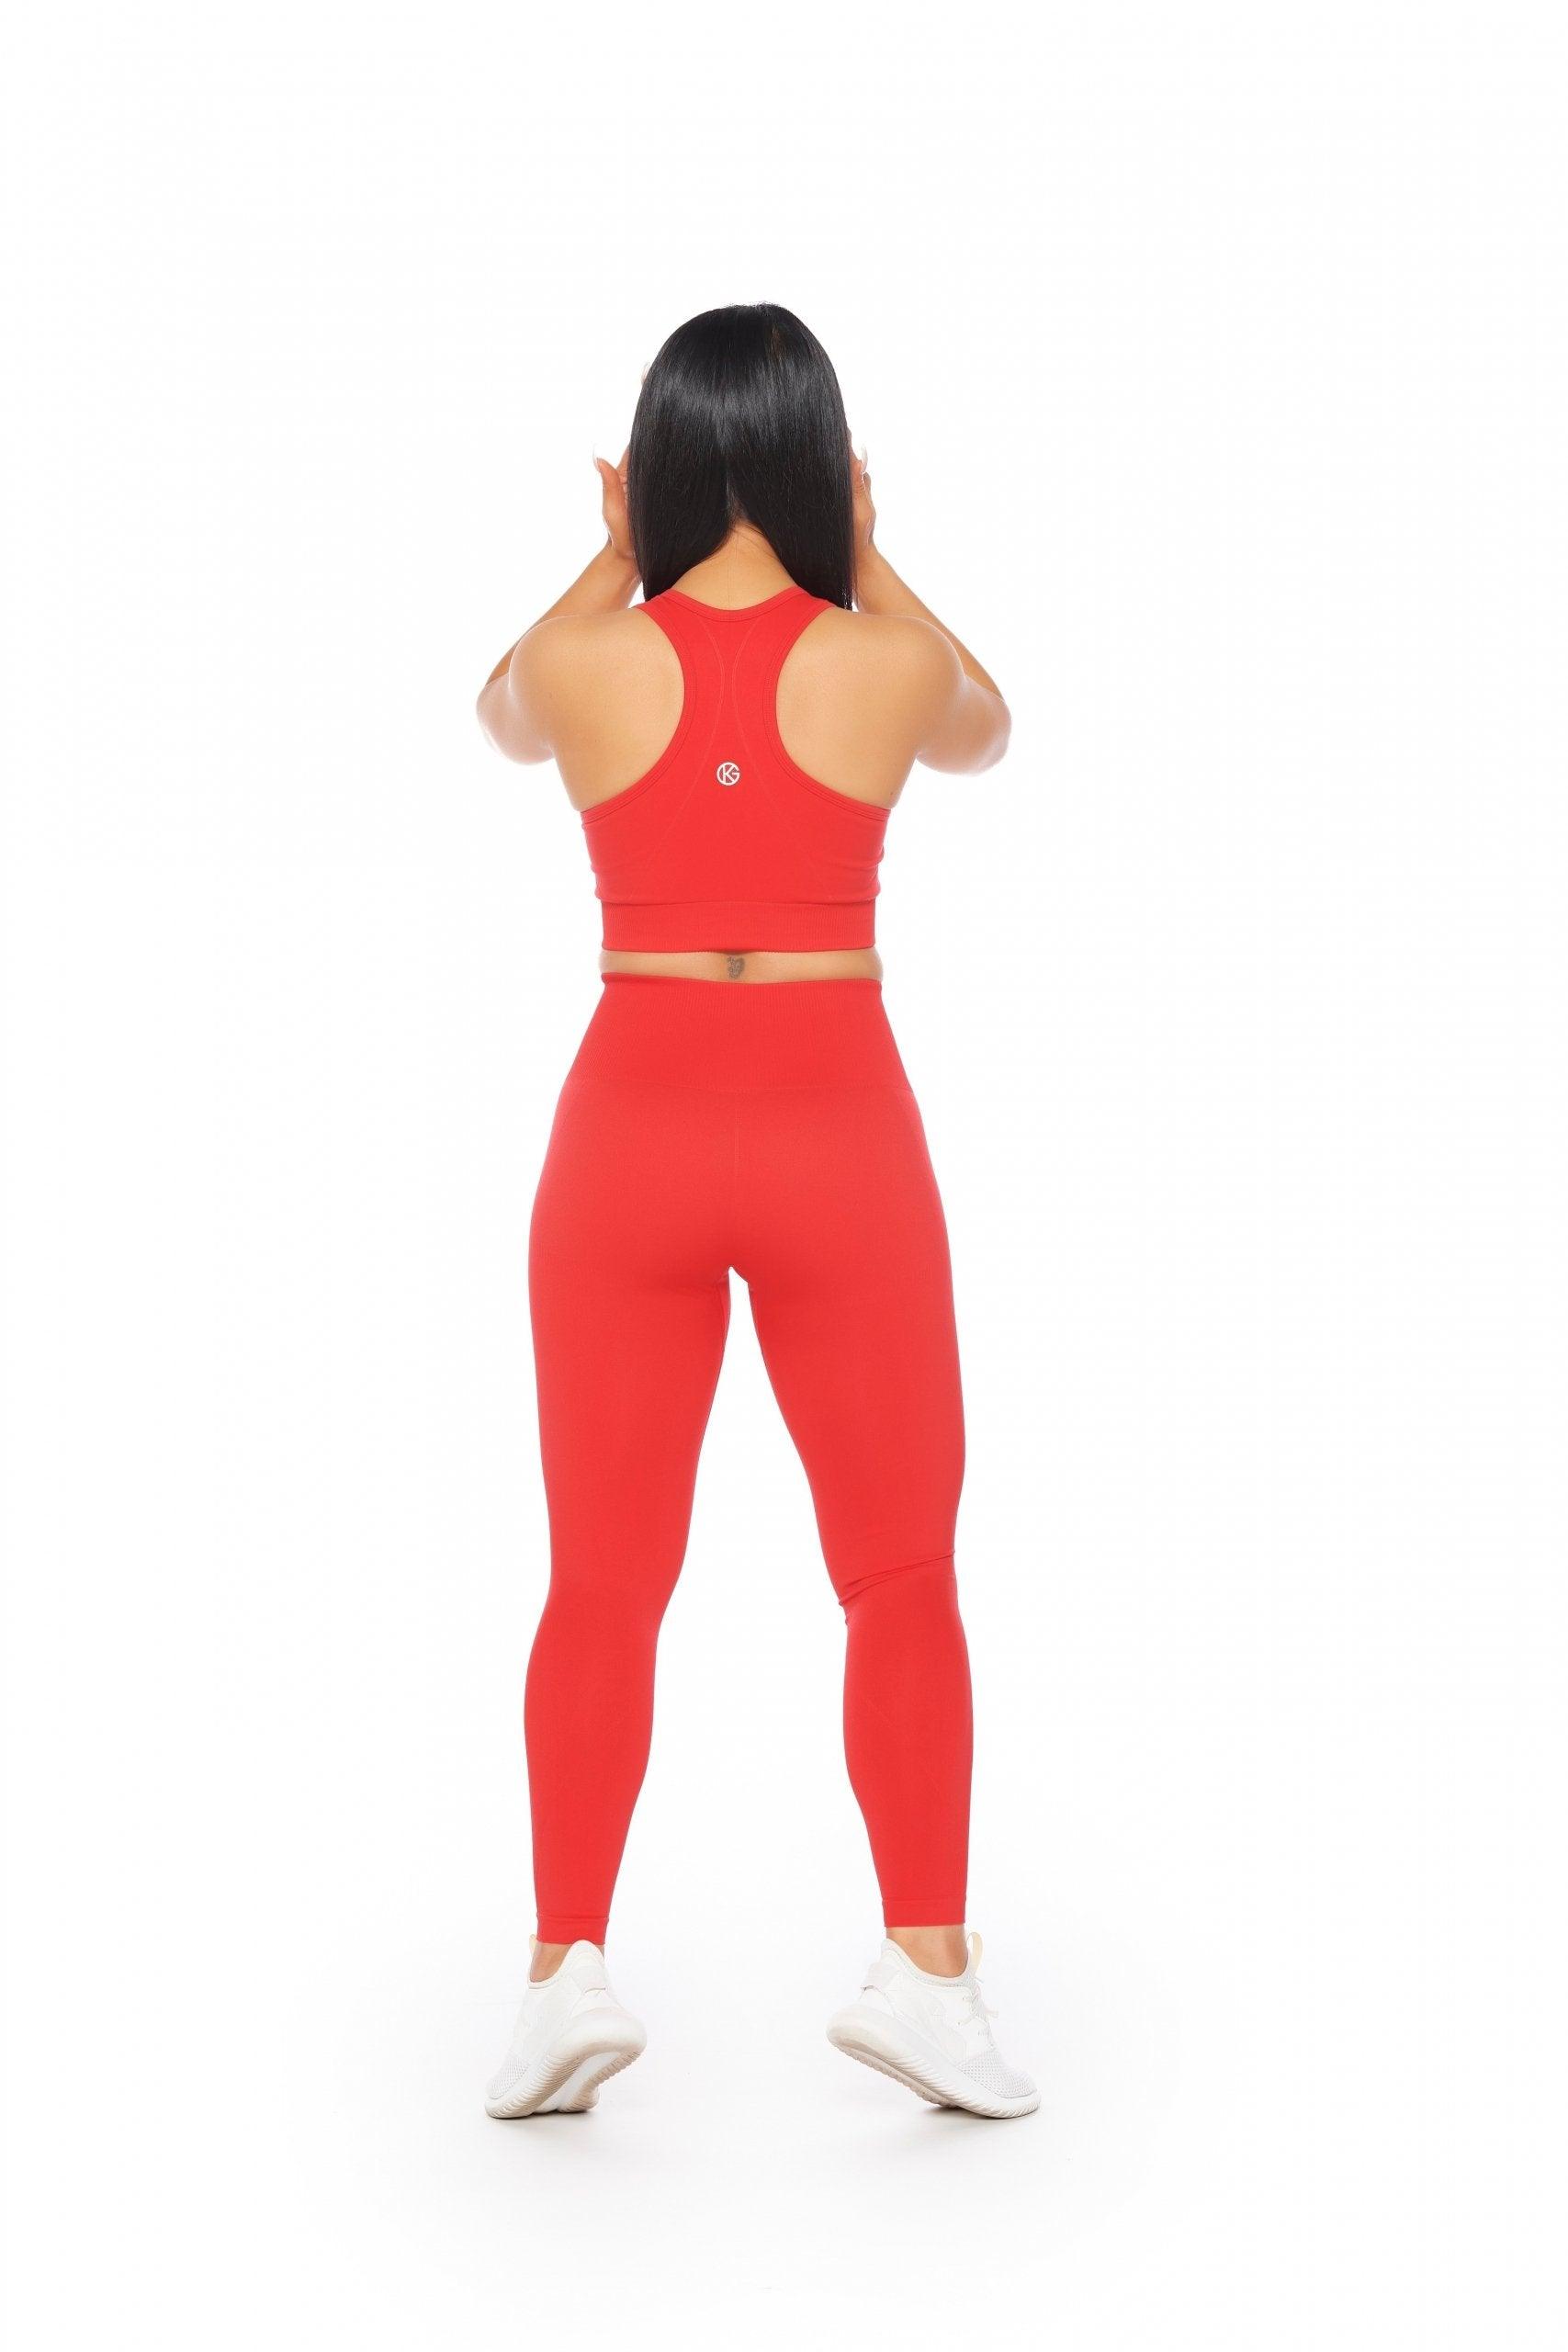 SEAMLESS Sports Bra - Candy Red - Kate Galliano